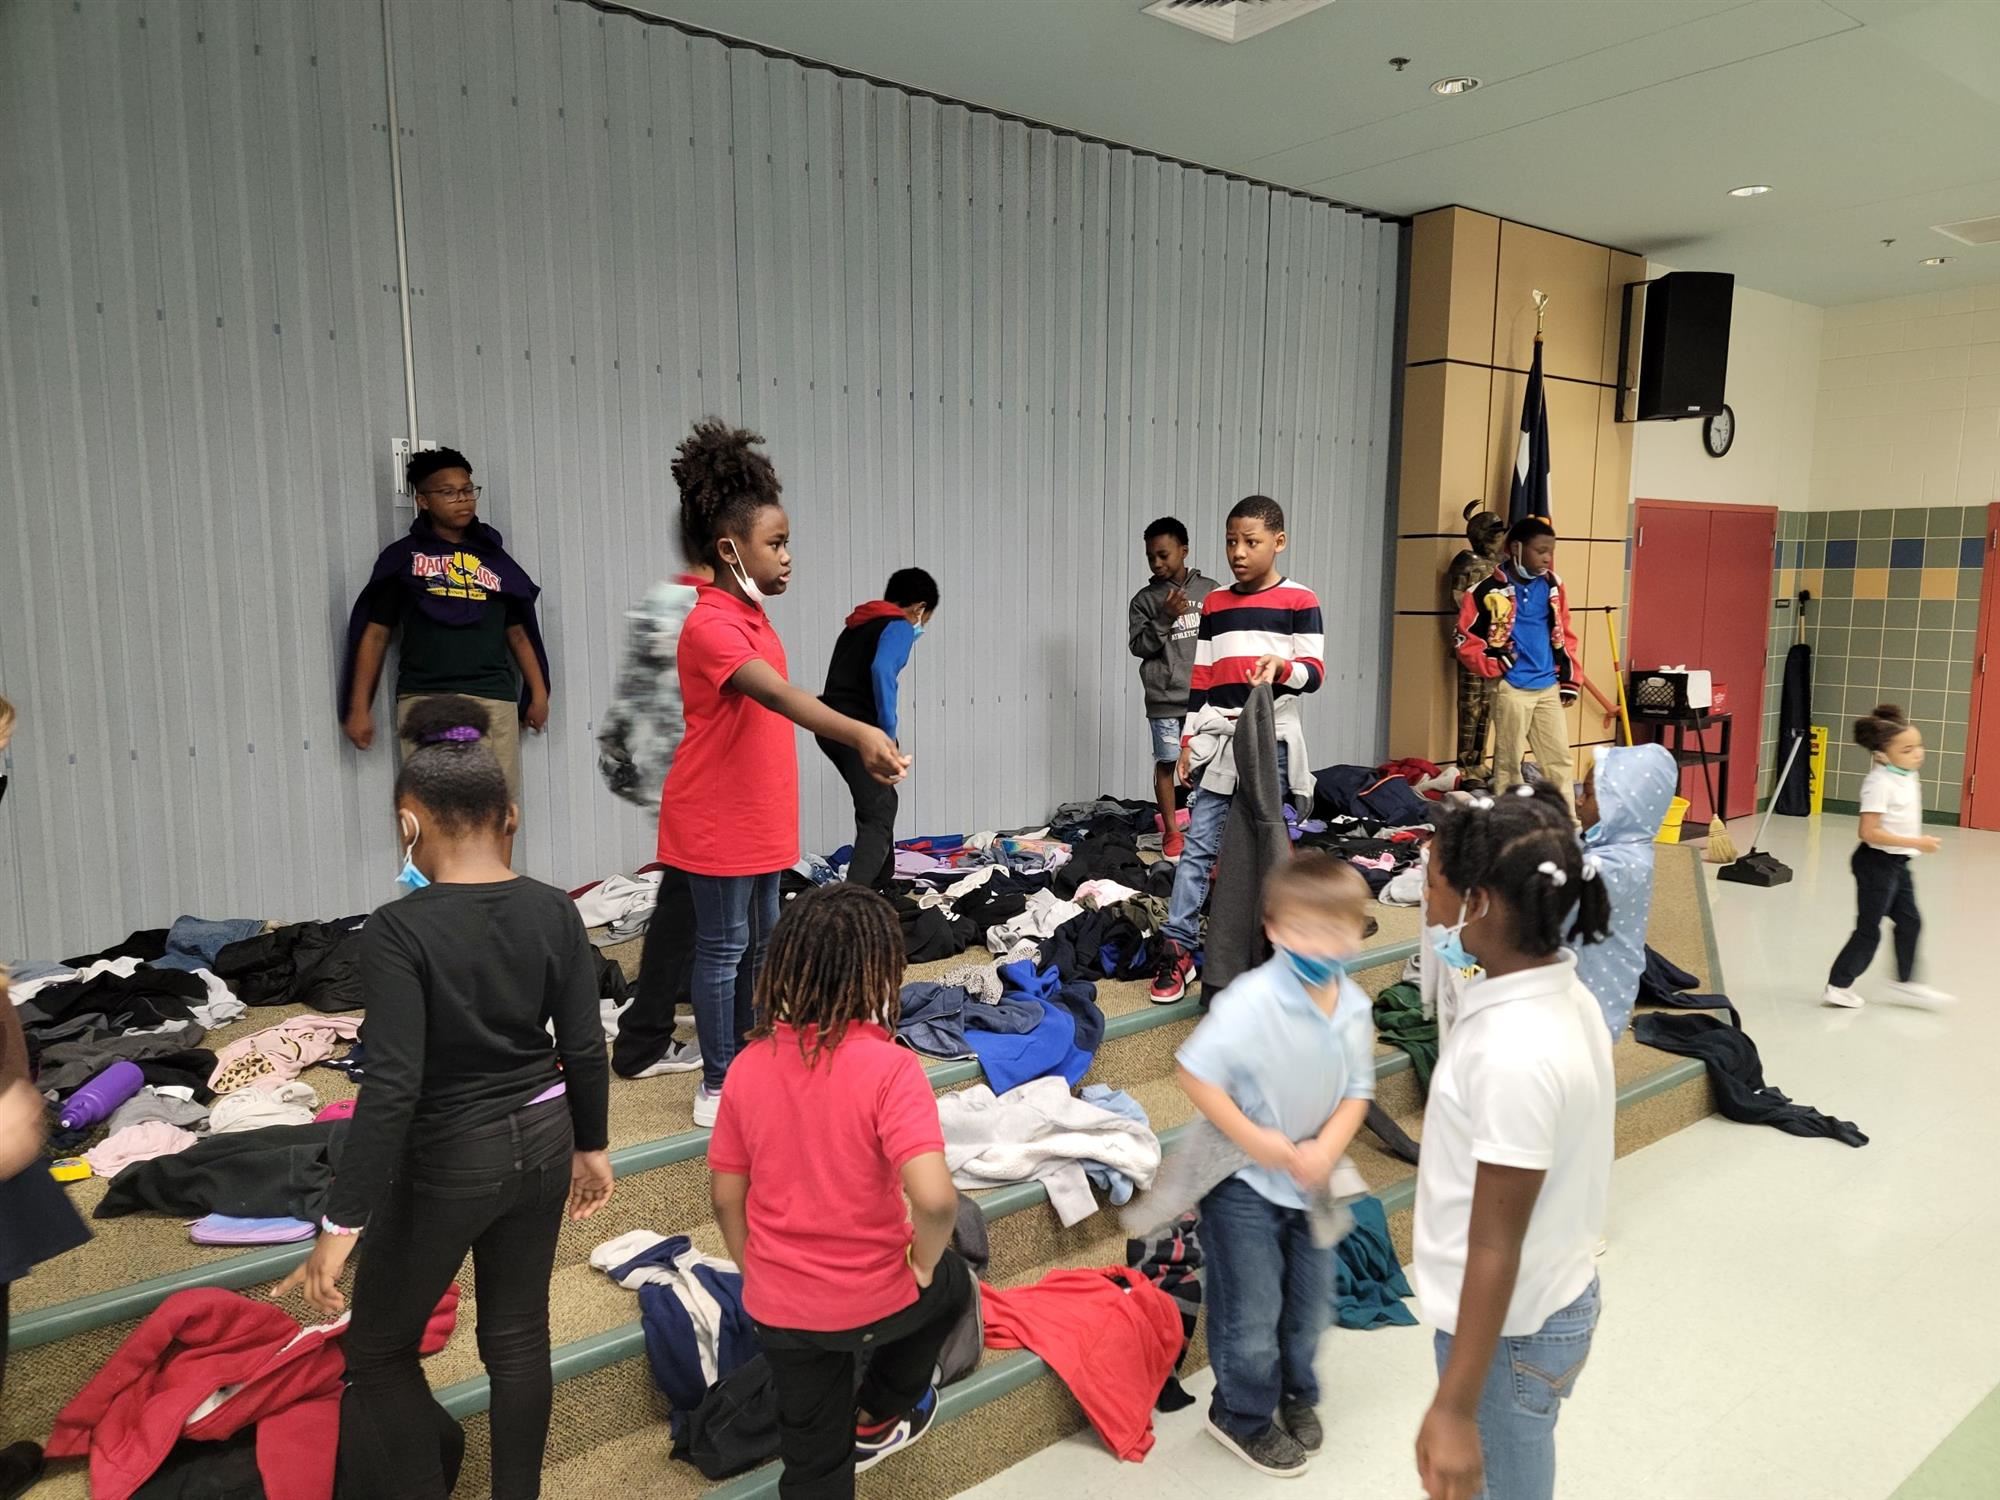 Sue Crouch Elementary students sorting clothes